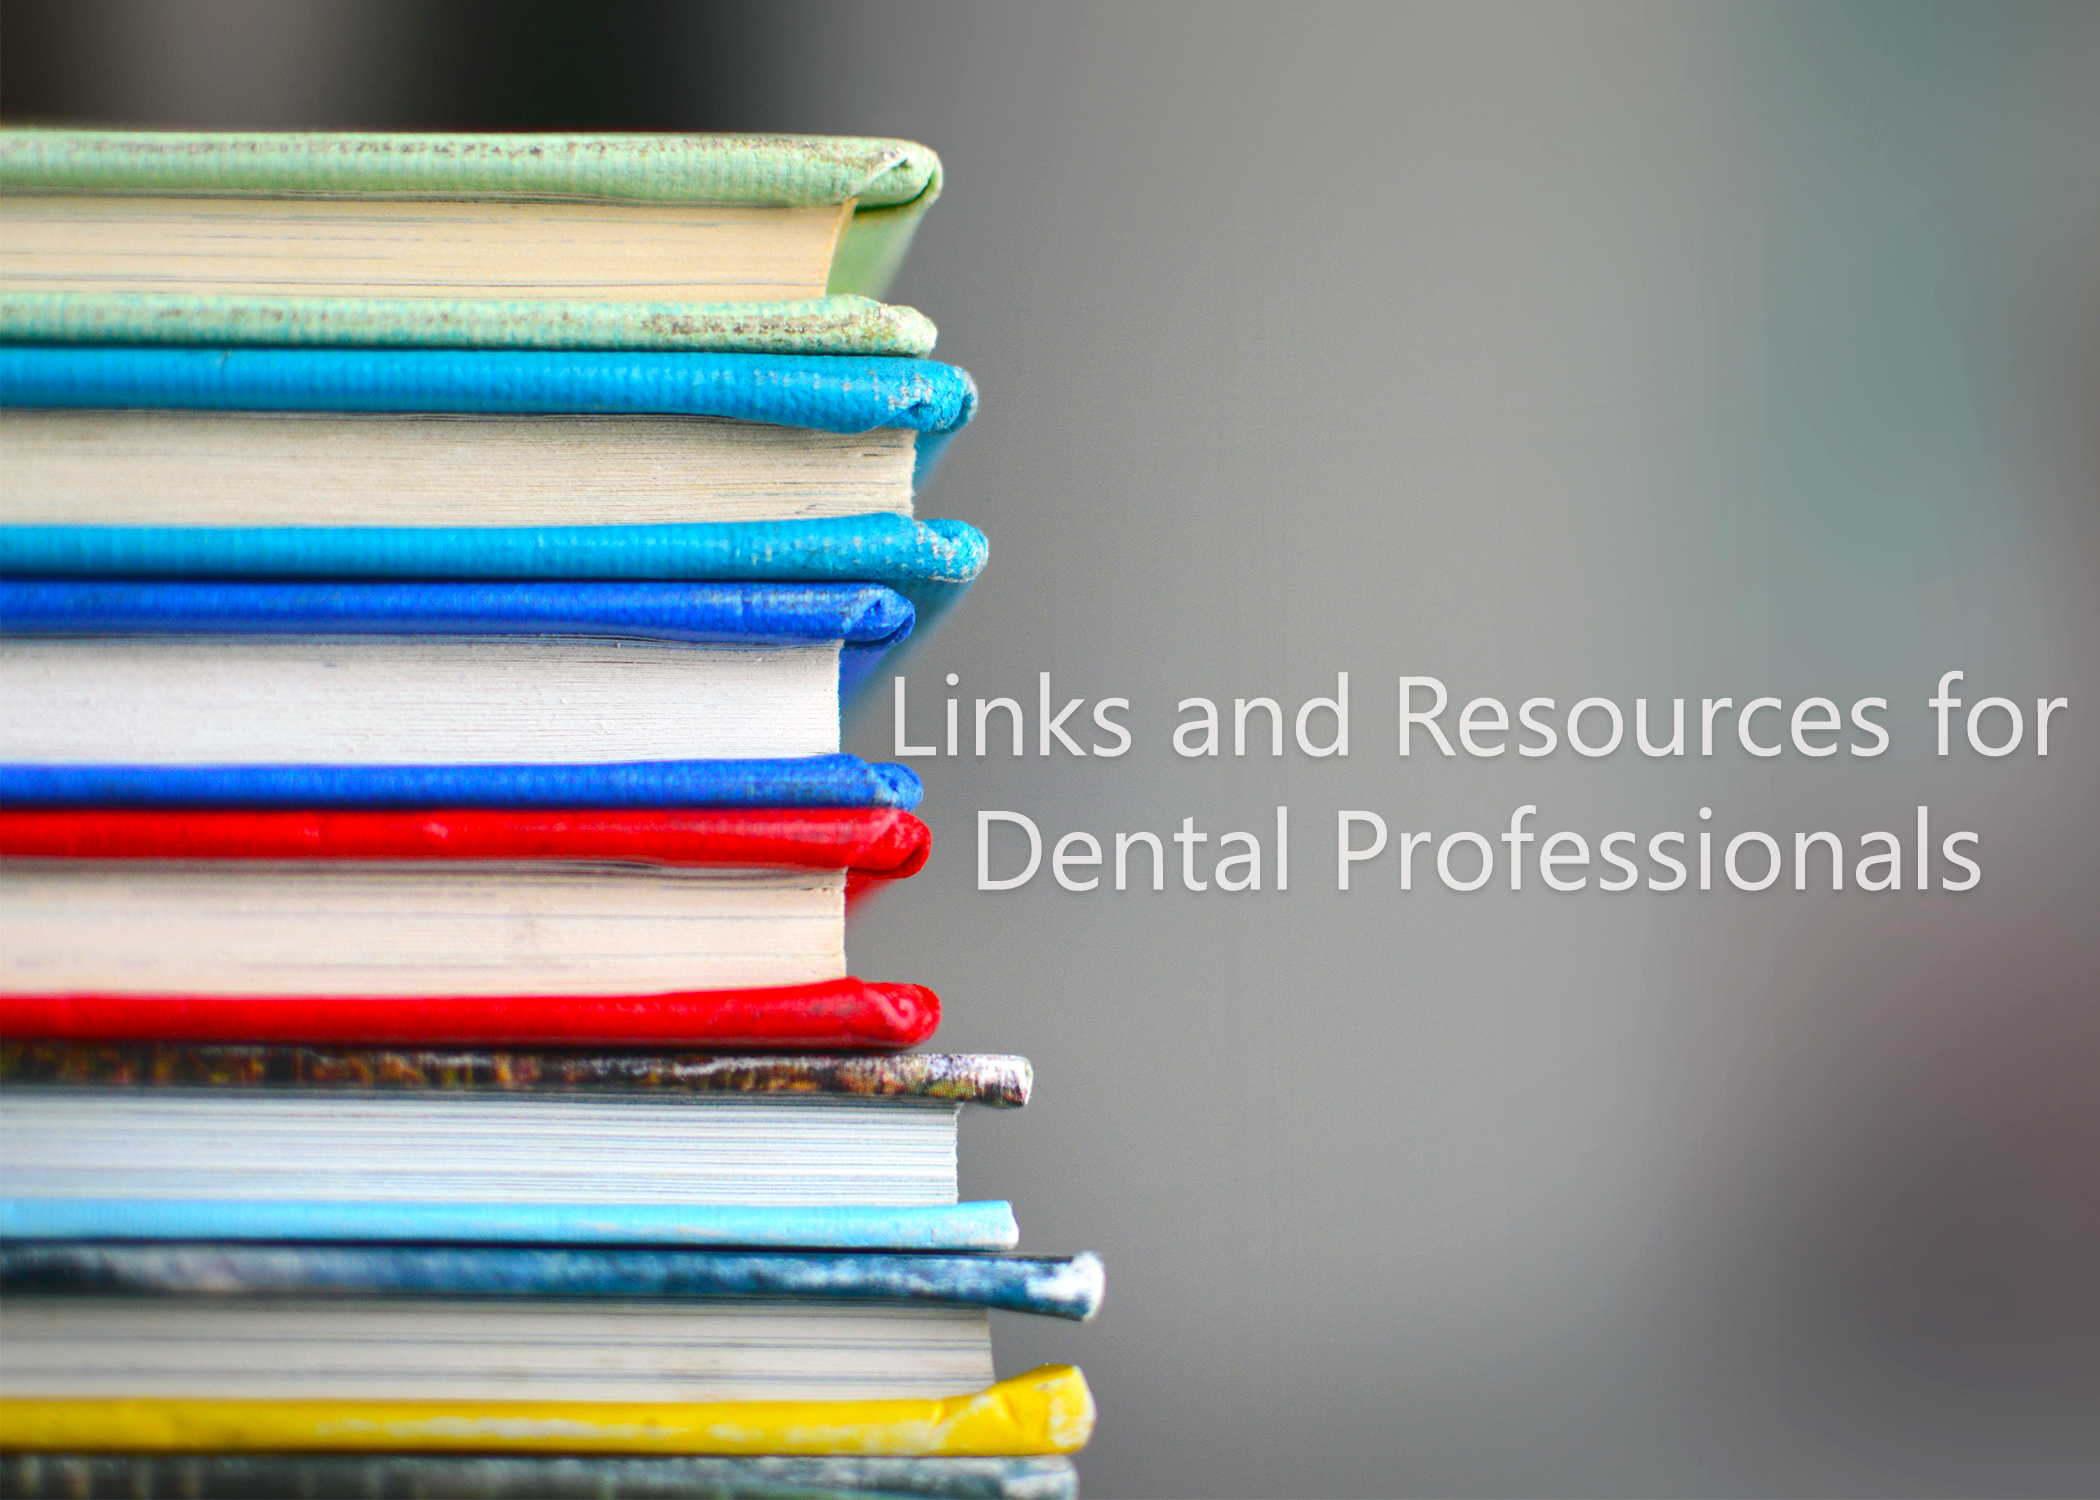 Practice Precautions and Additional Resources for Dentists: COVID-19